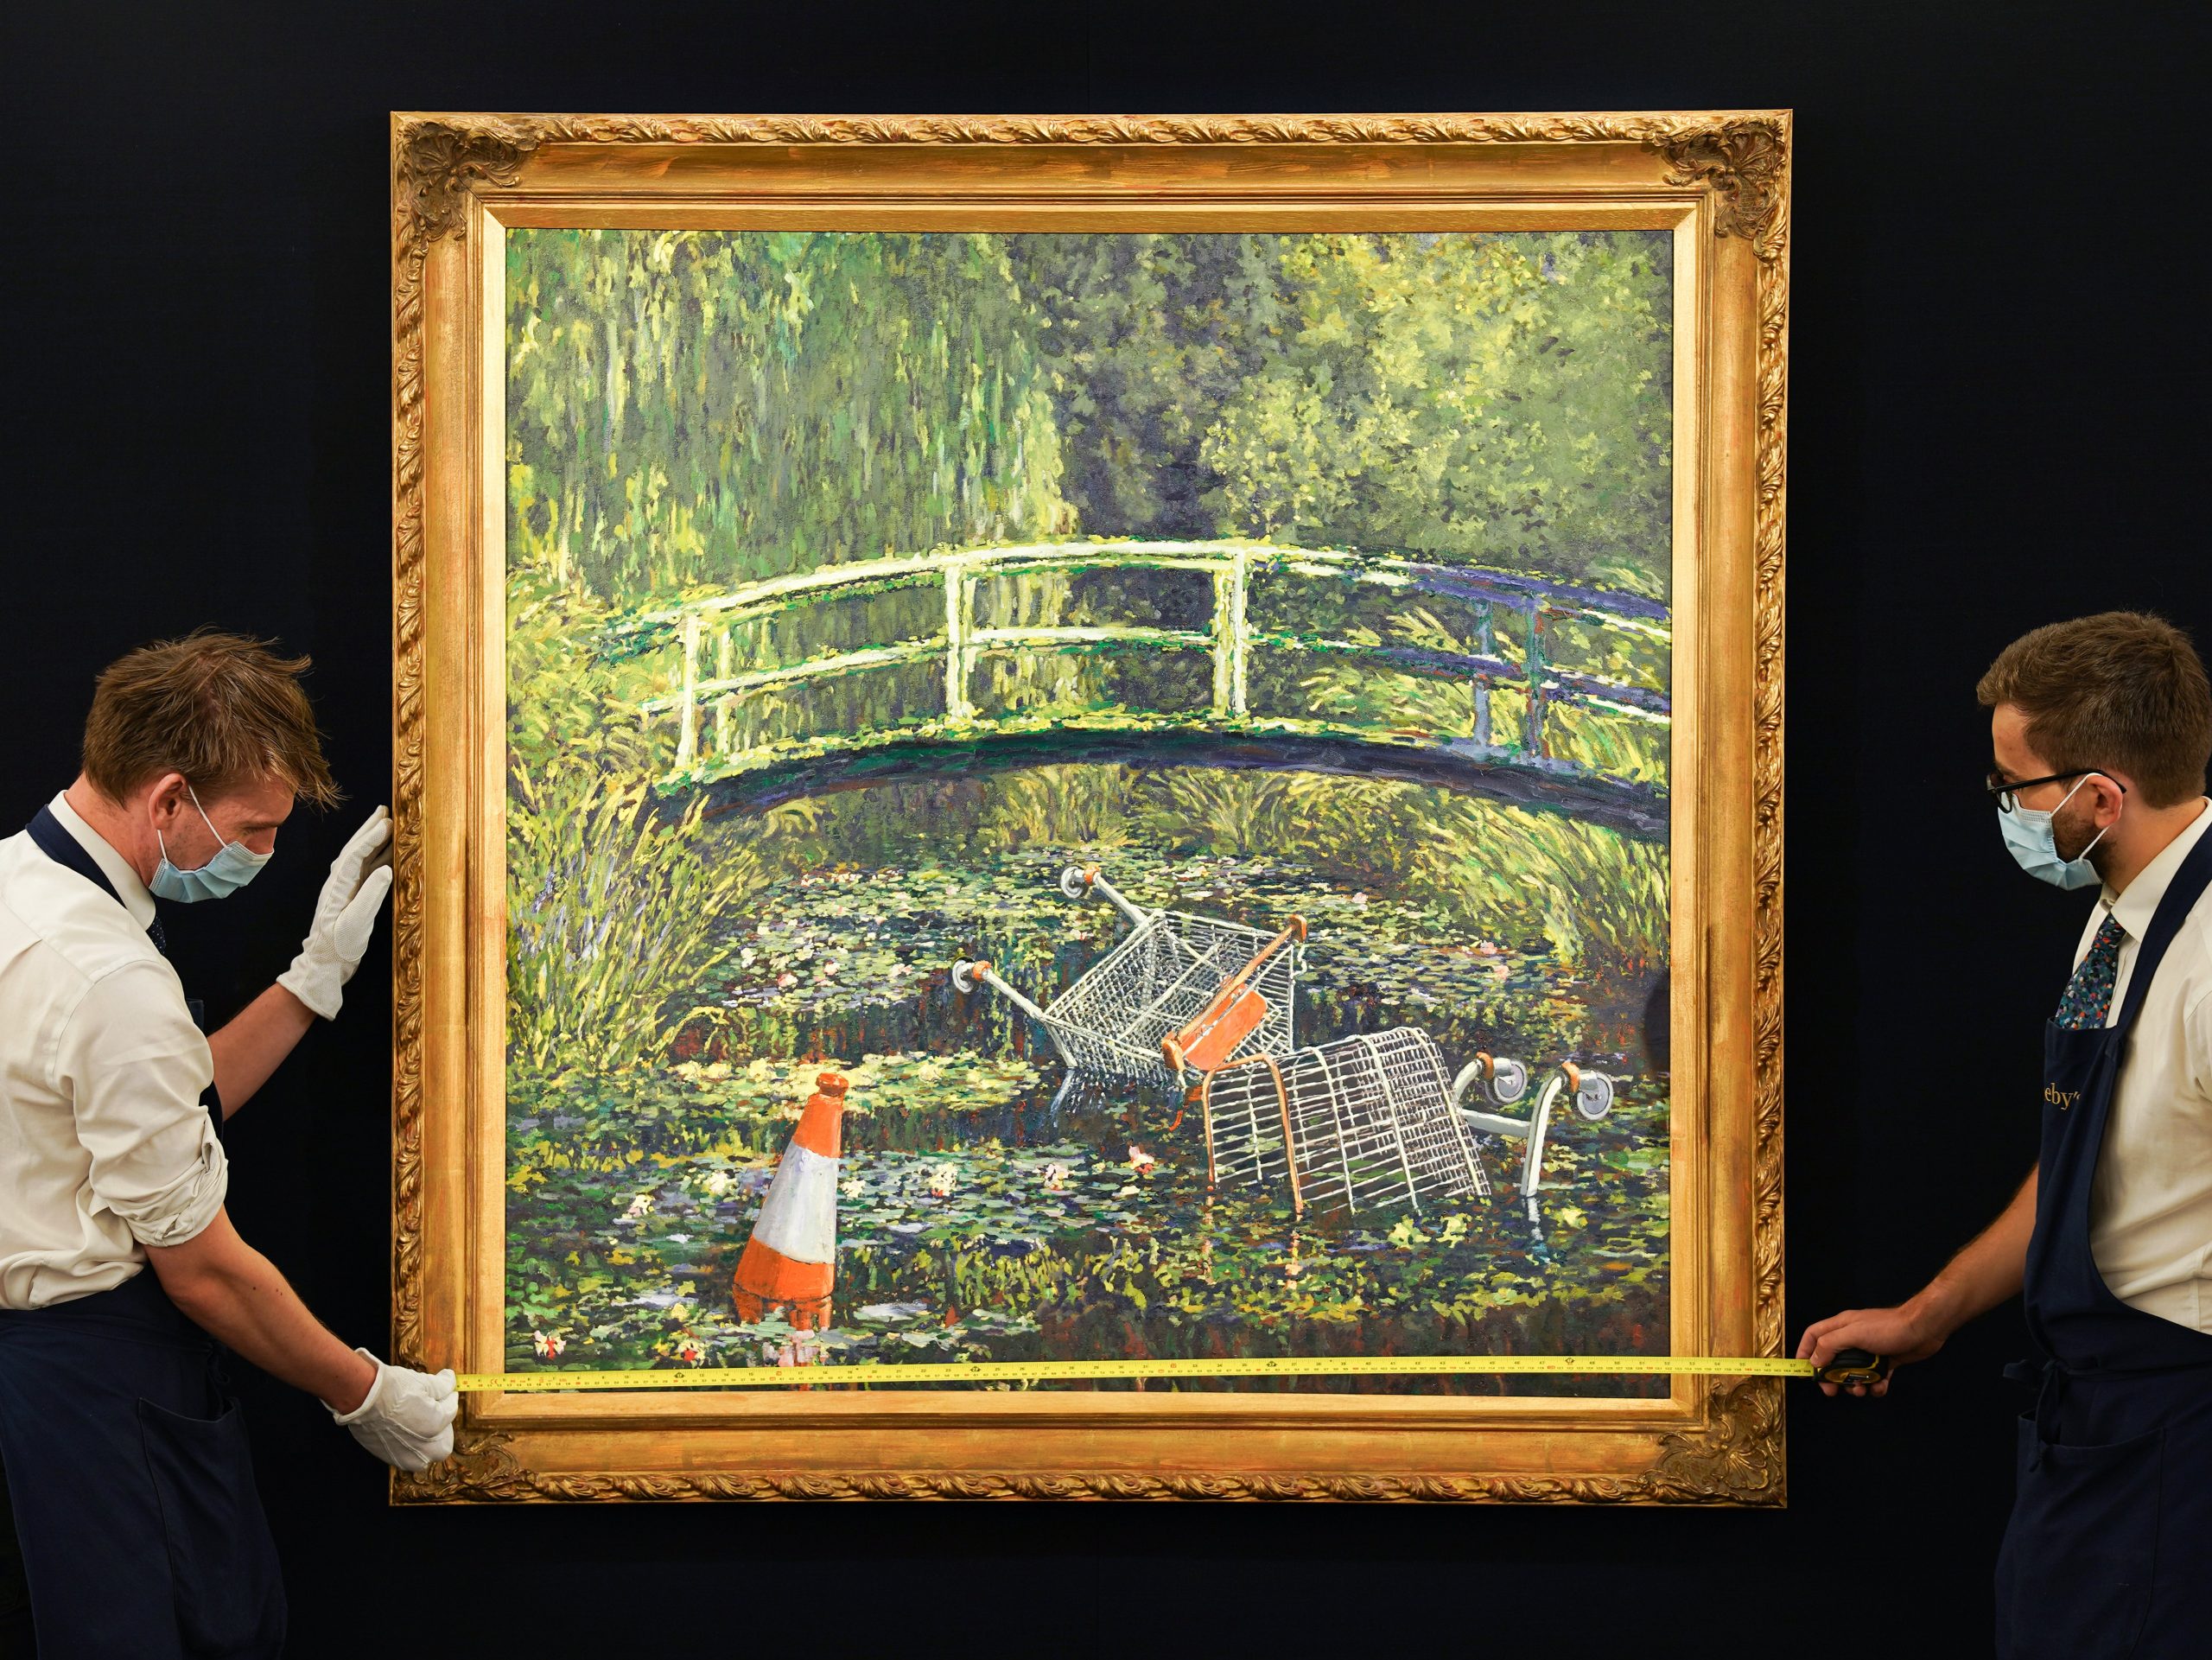 Banksy's `` Show Me the Monet '' became the second most expensive work of art ever

